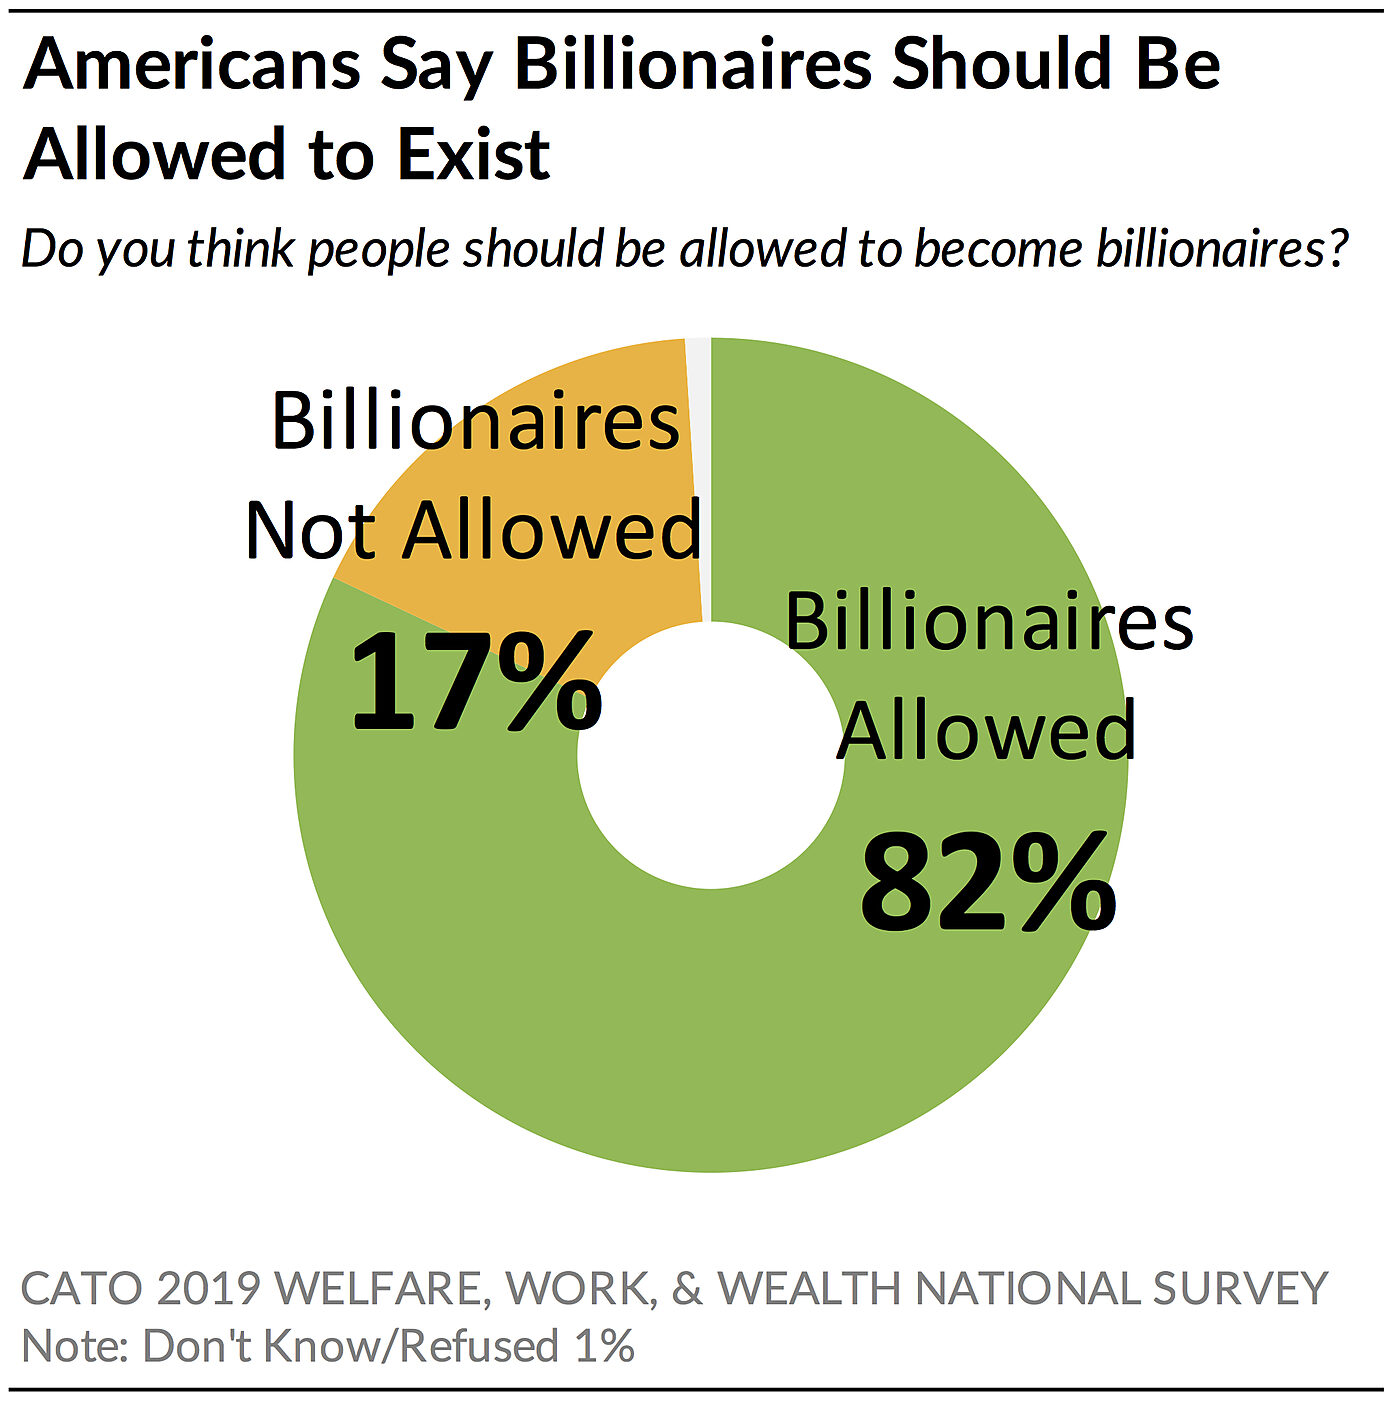 Americans say billionaires should be allowed to exist